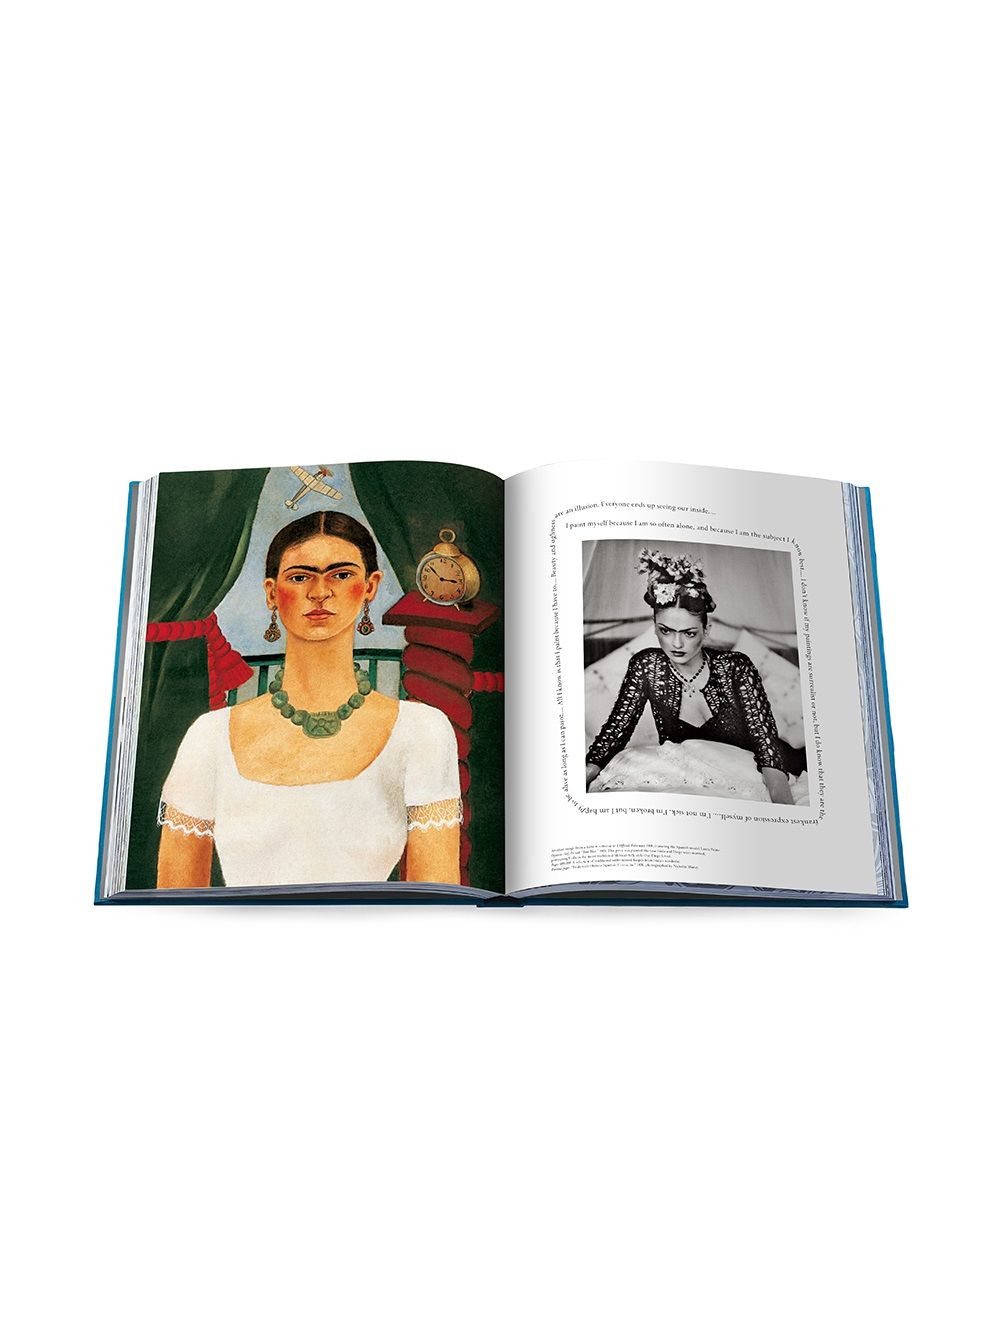 Shop Assouline Frida Kahlo: Fashion As The Art Of Being In Yellow